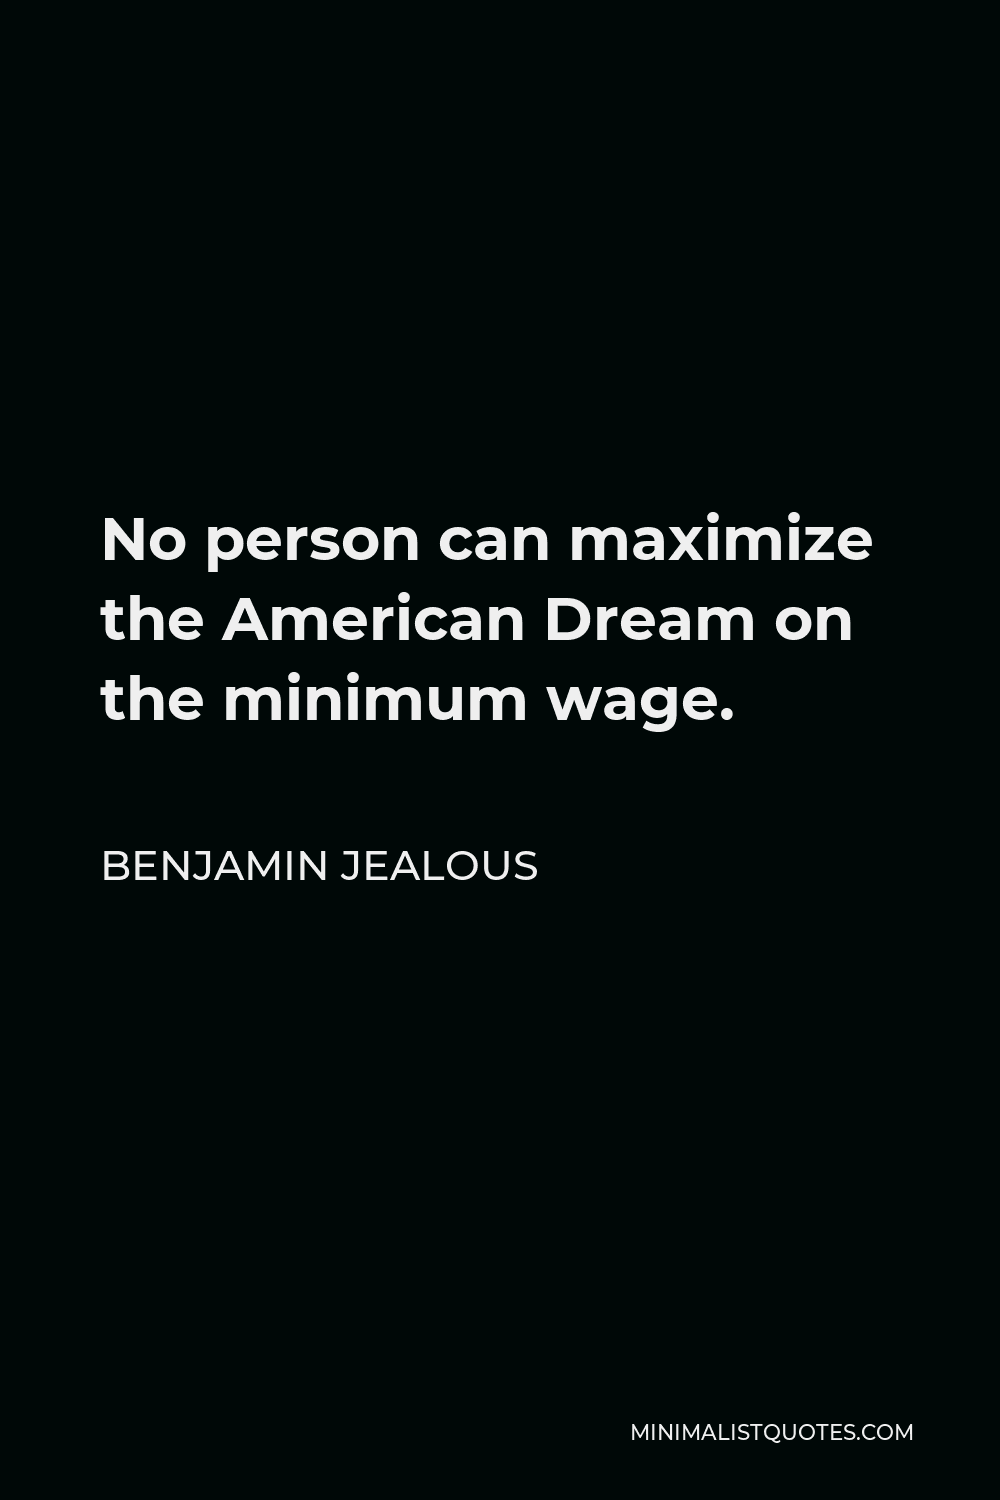 Benjamin Jealous Quote - No person can maximize the American Dream on the minimum wage.